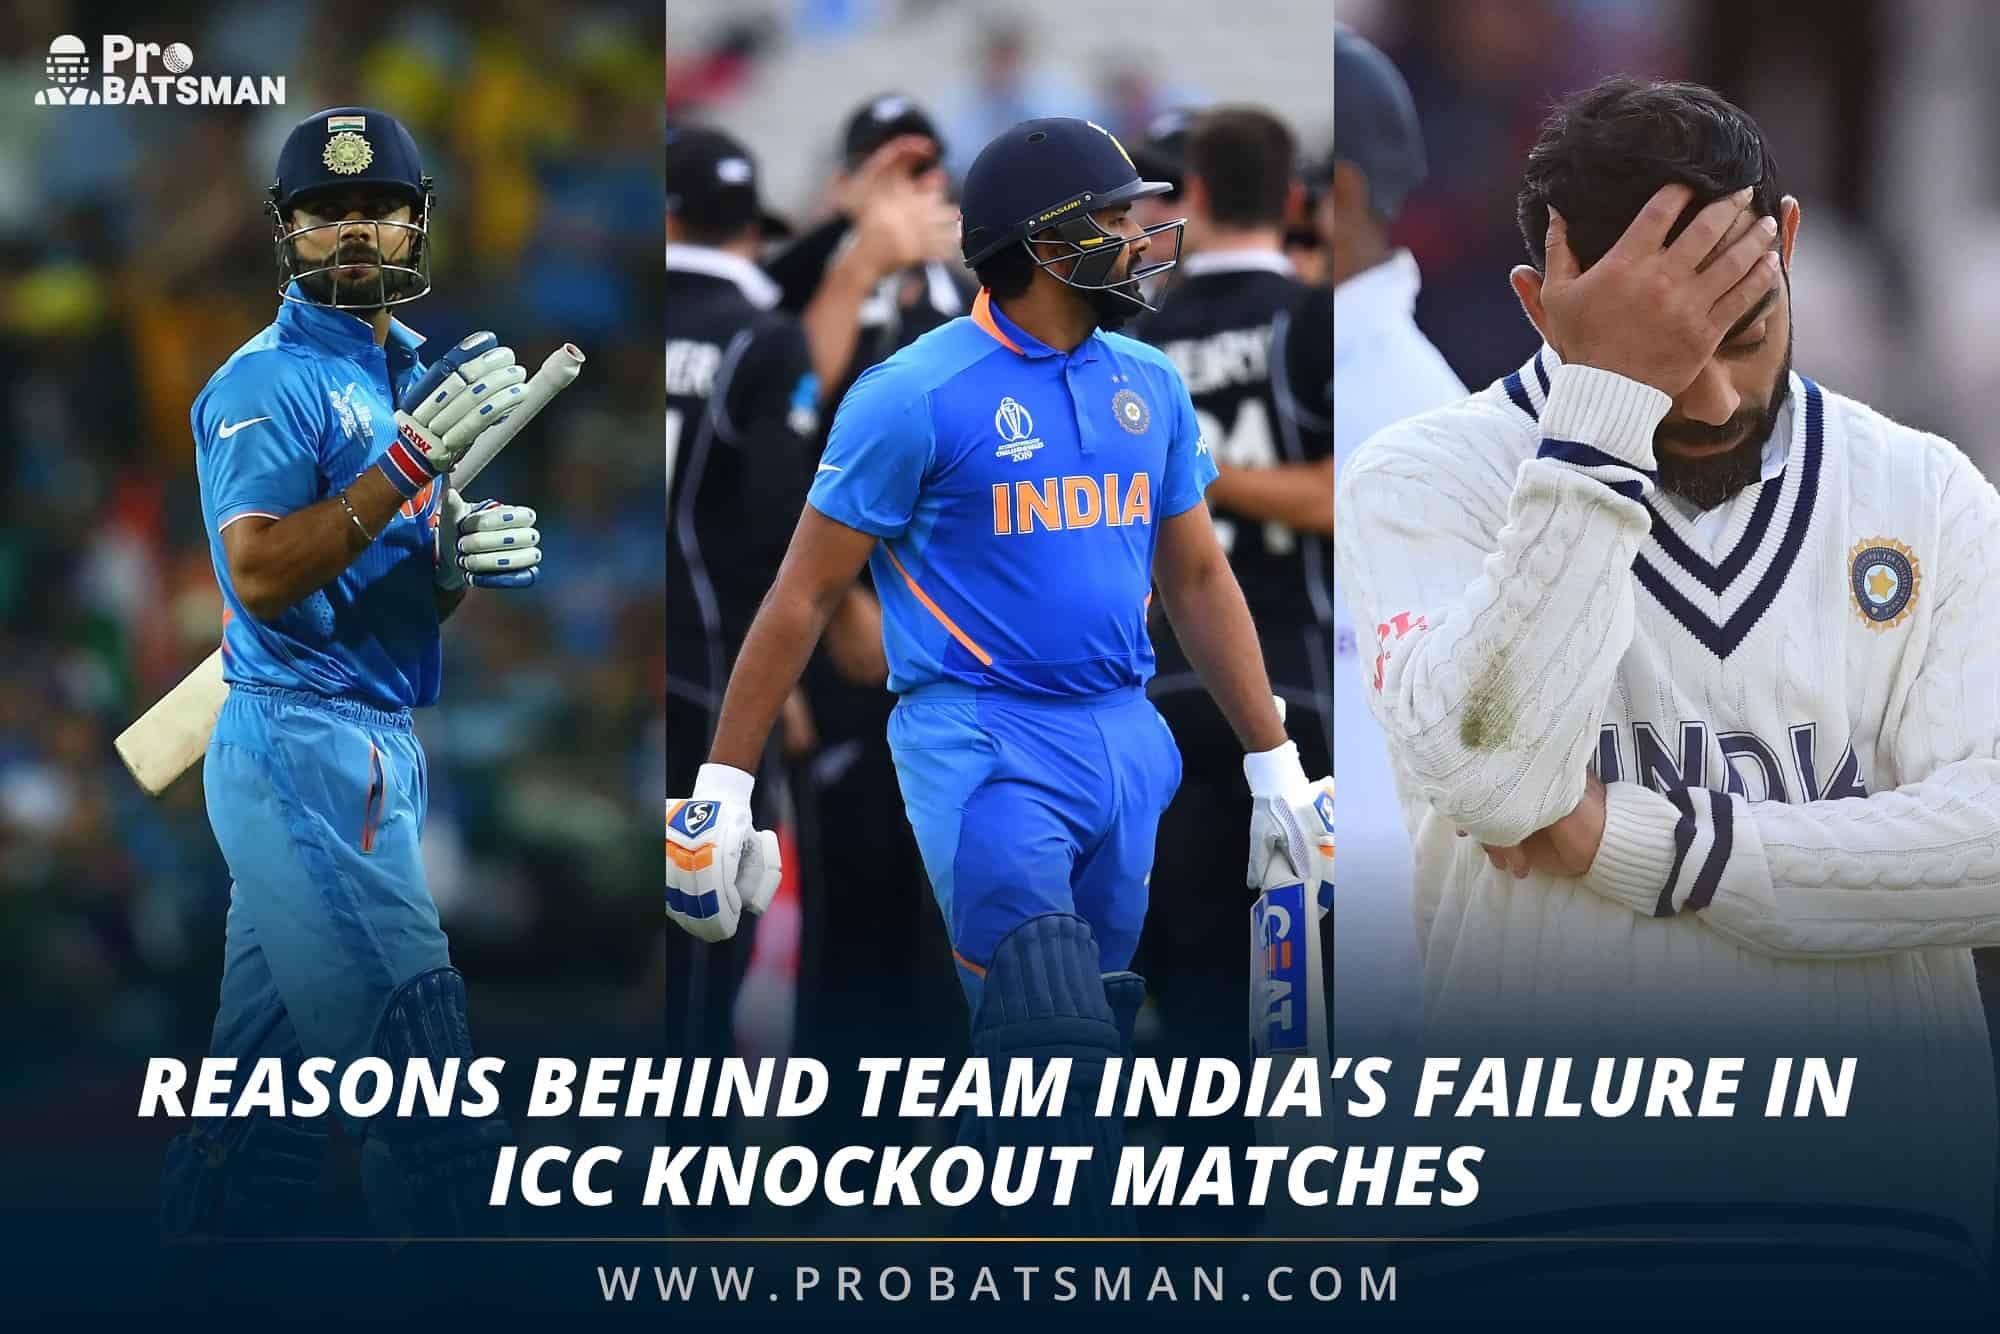 3 Reasons Behind Team India's Failure In ICC Knockout Matches